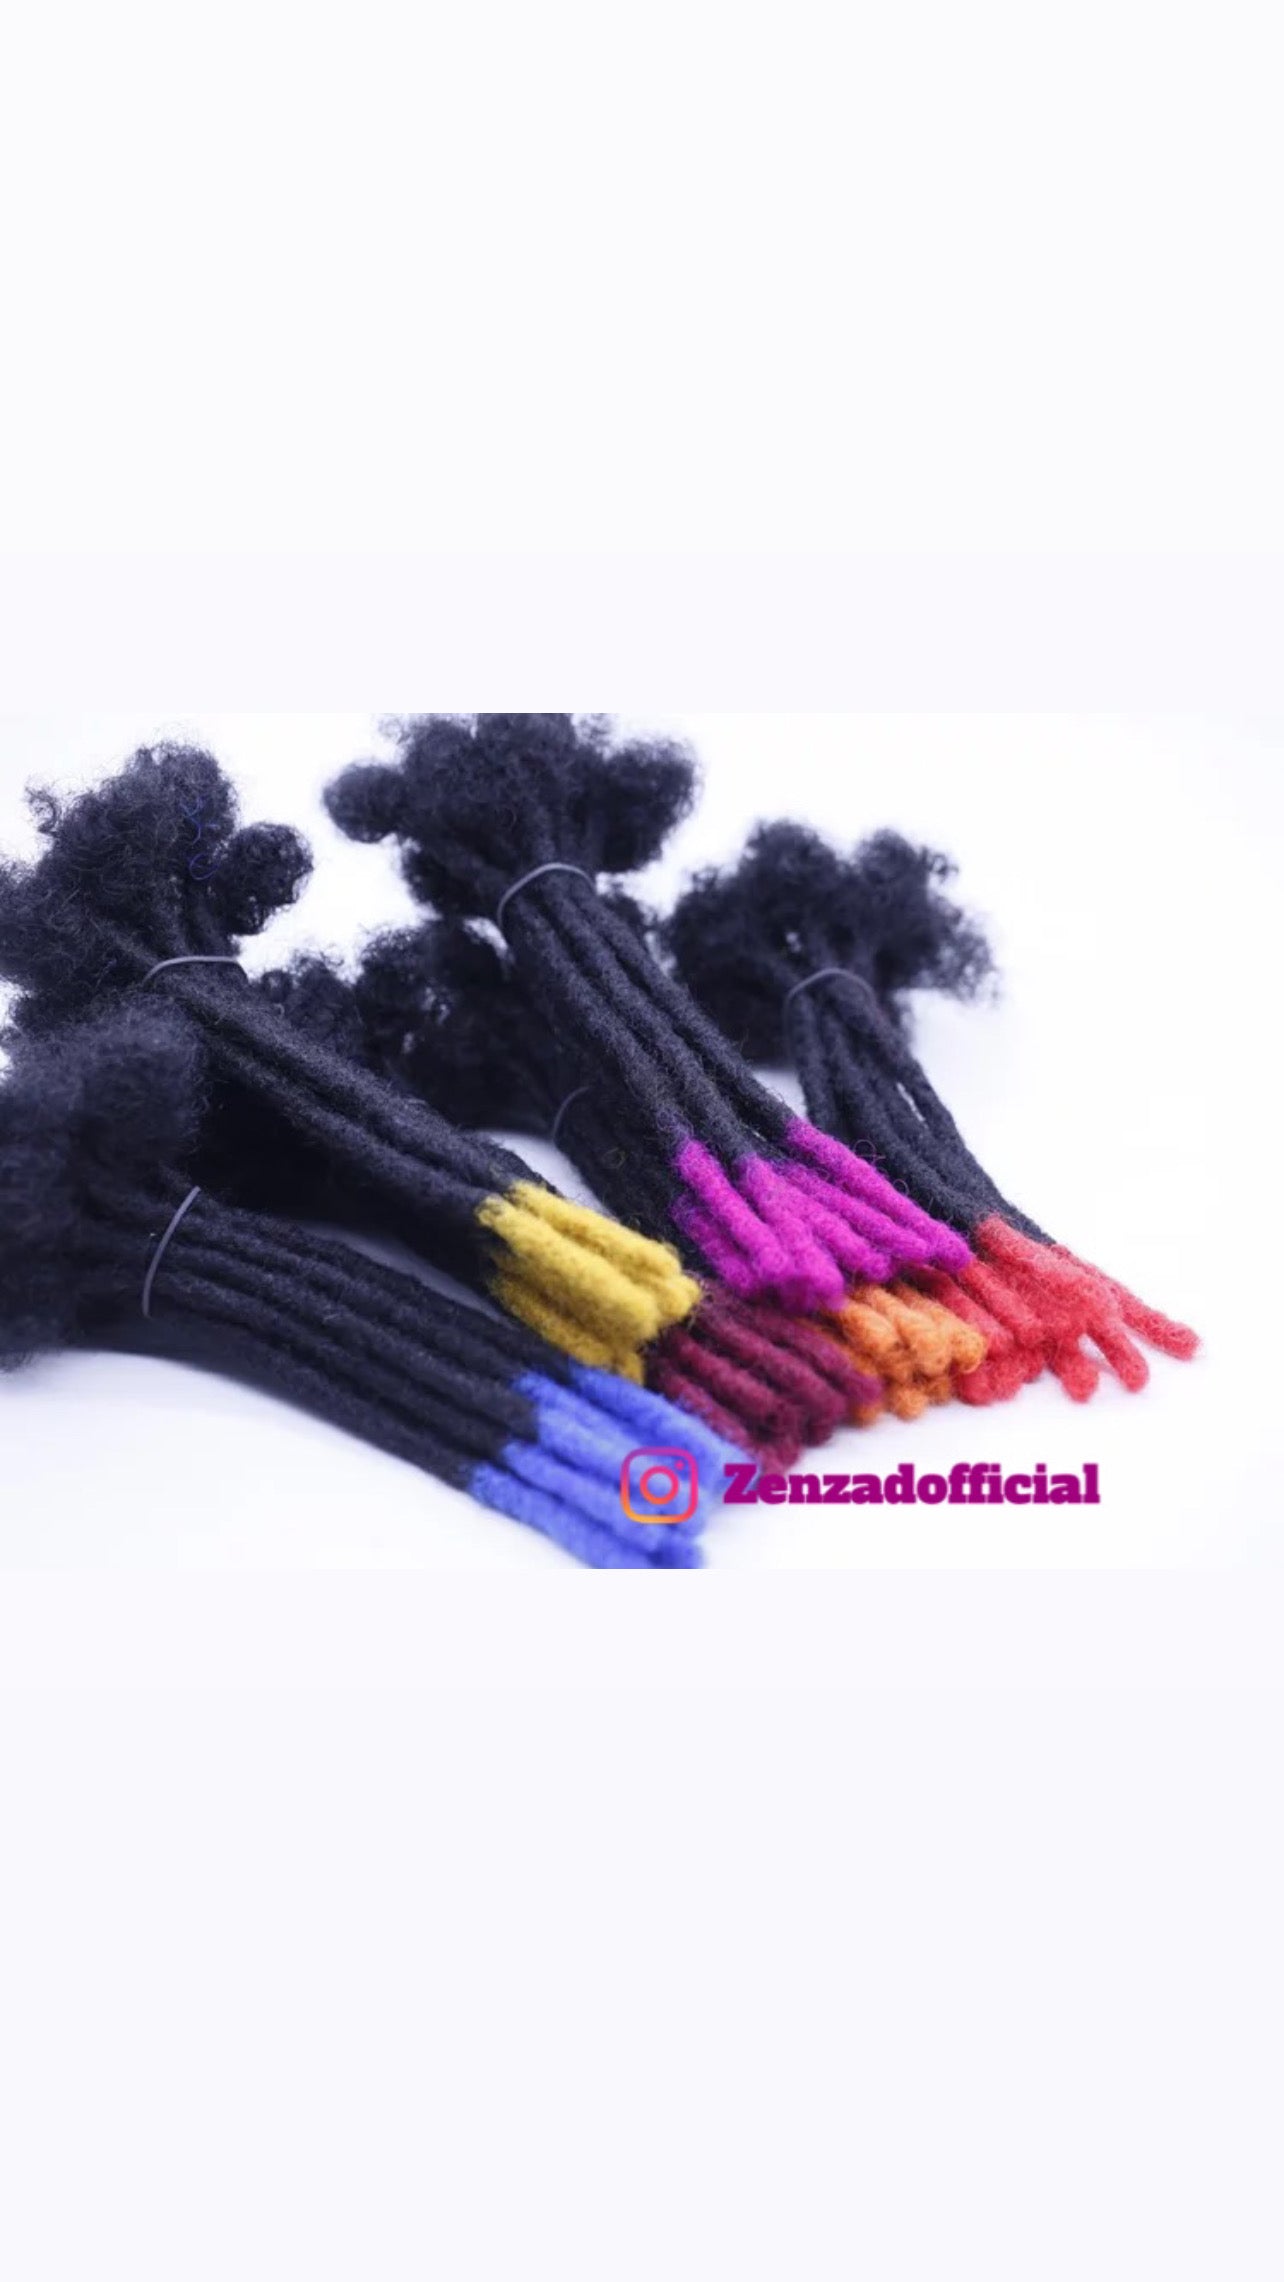 dreads extension 6inch 10 strands